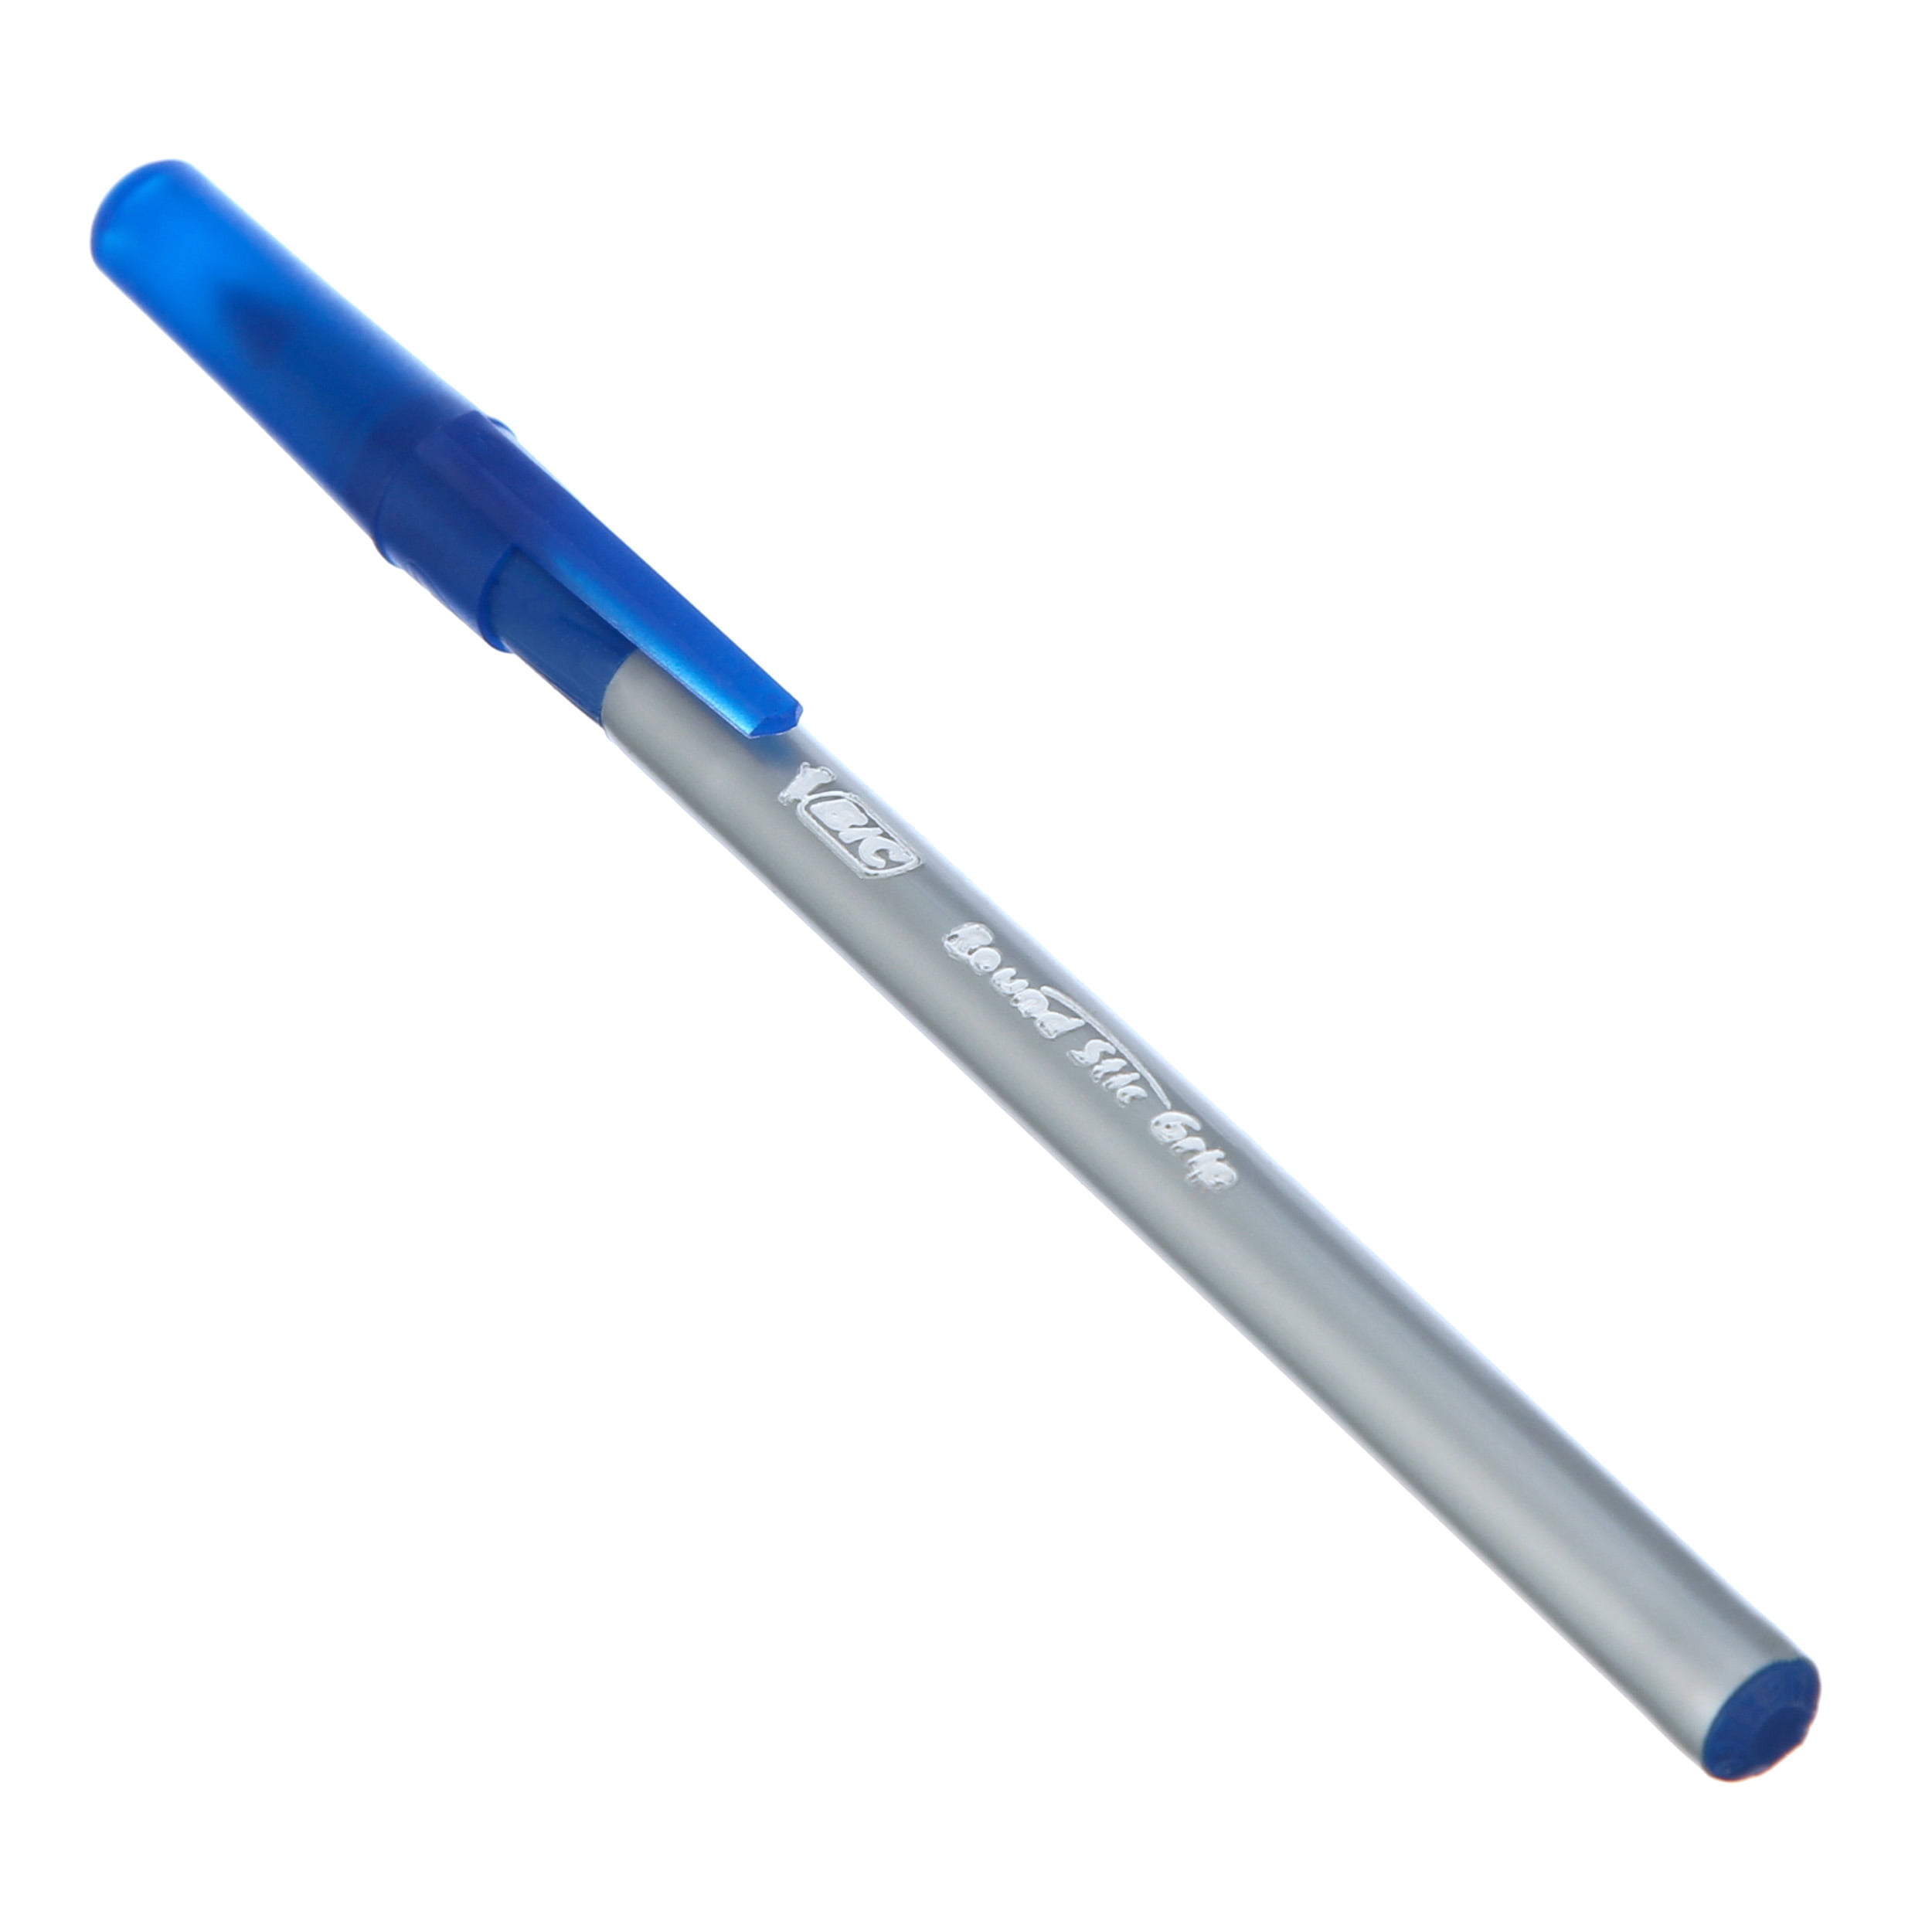 0.8mm 12-Count Blue Fine Point Round Stic Grip Xtra Comfort Ballpoint Pen Pack of 8